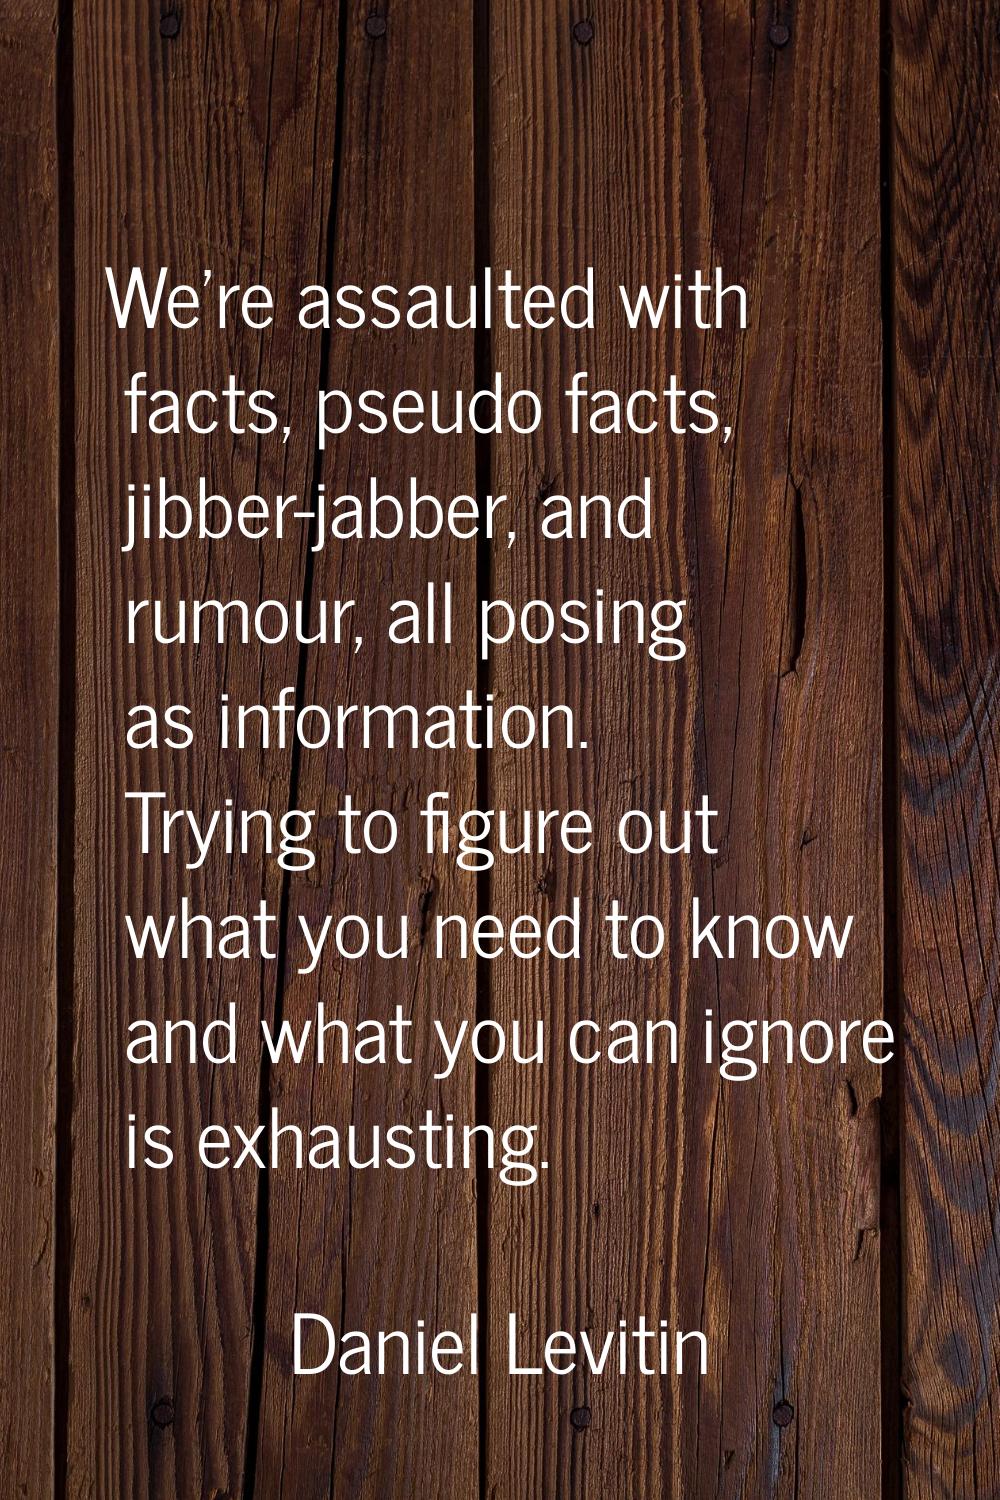 We're assaulted with facts, pseudo facts, jibber-jabber, and rumour, all posing as information. Try